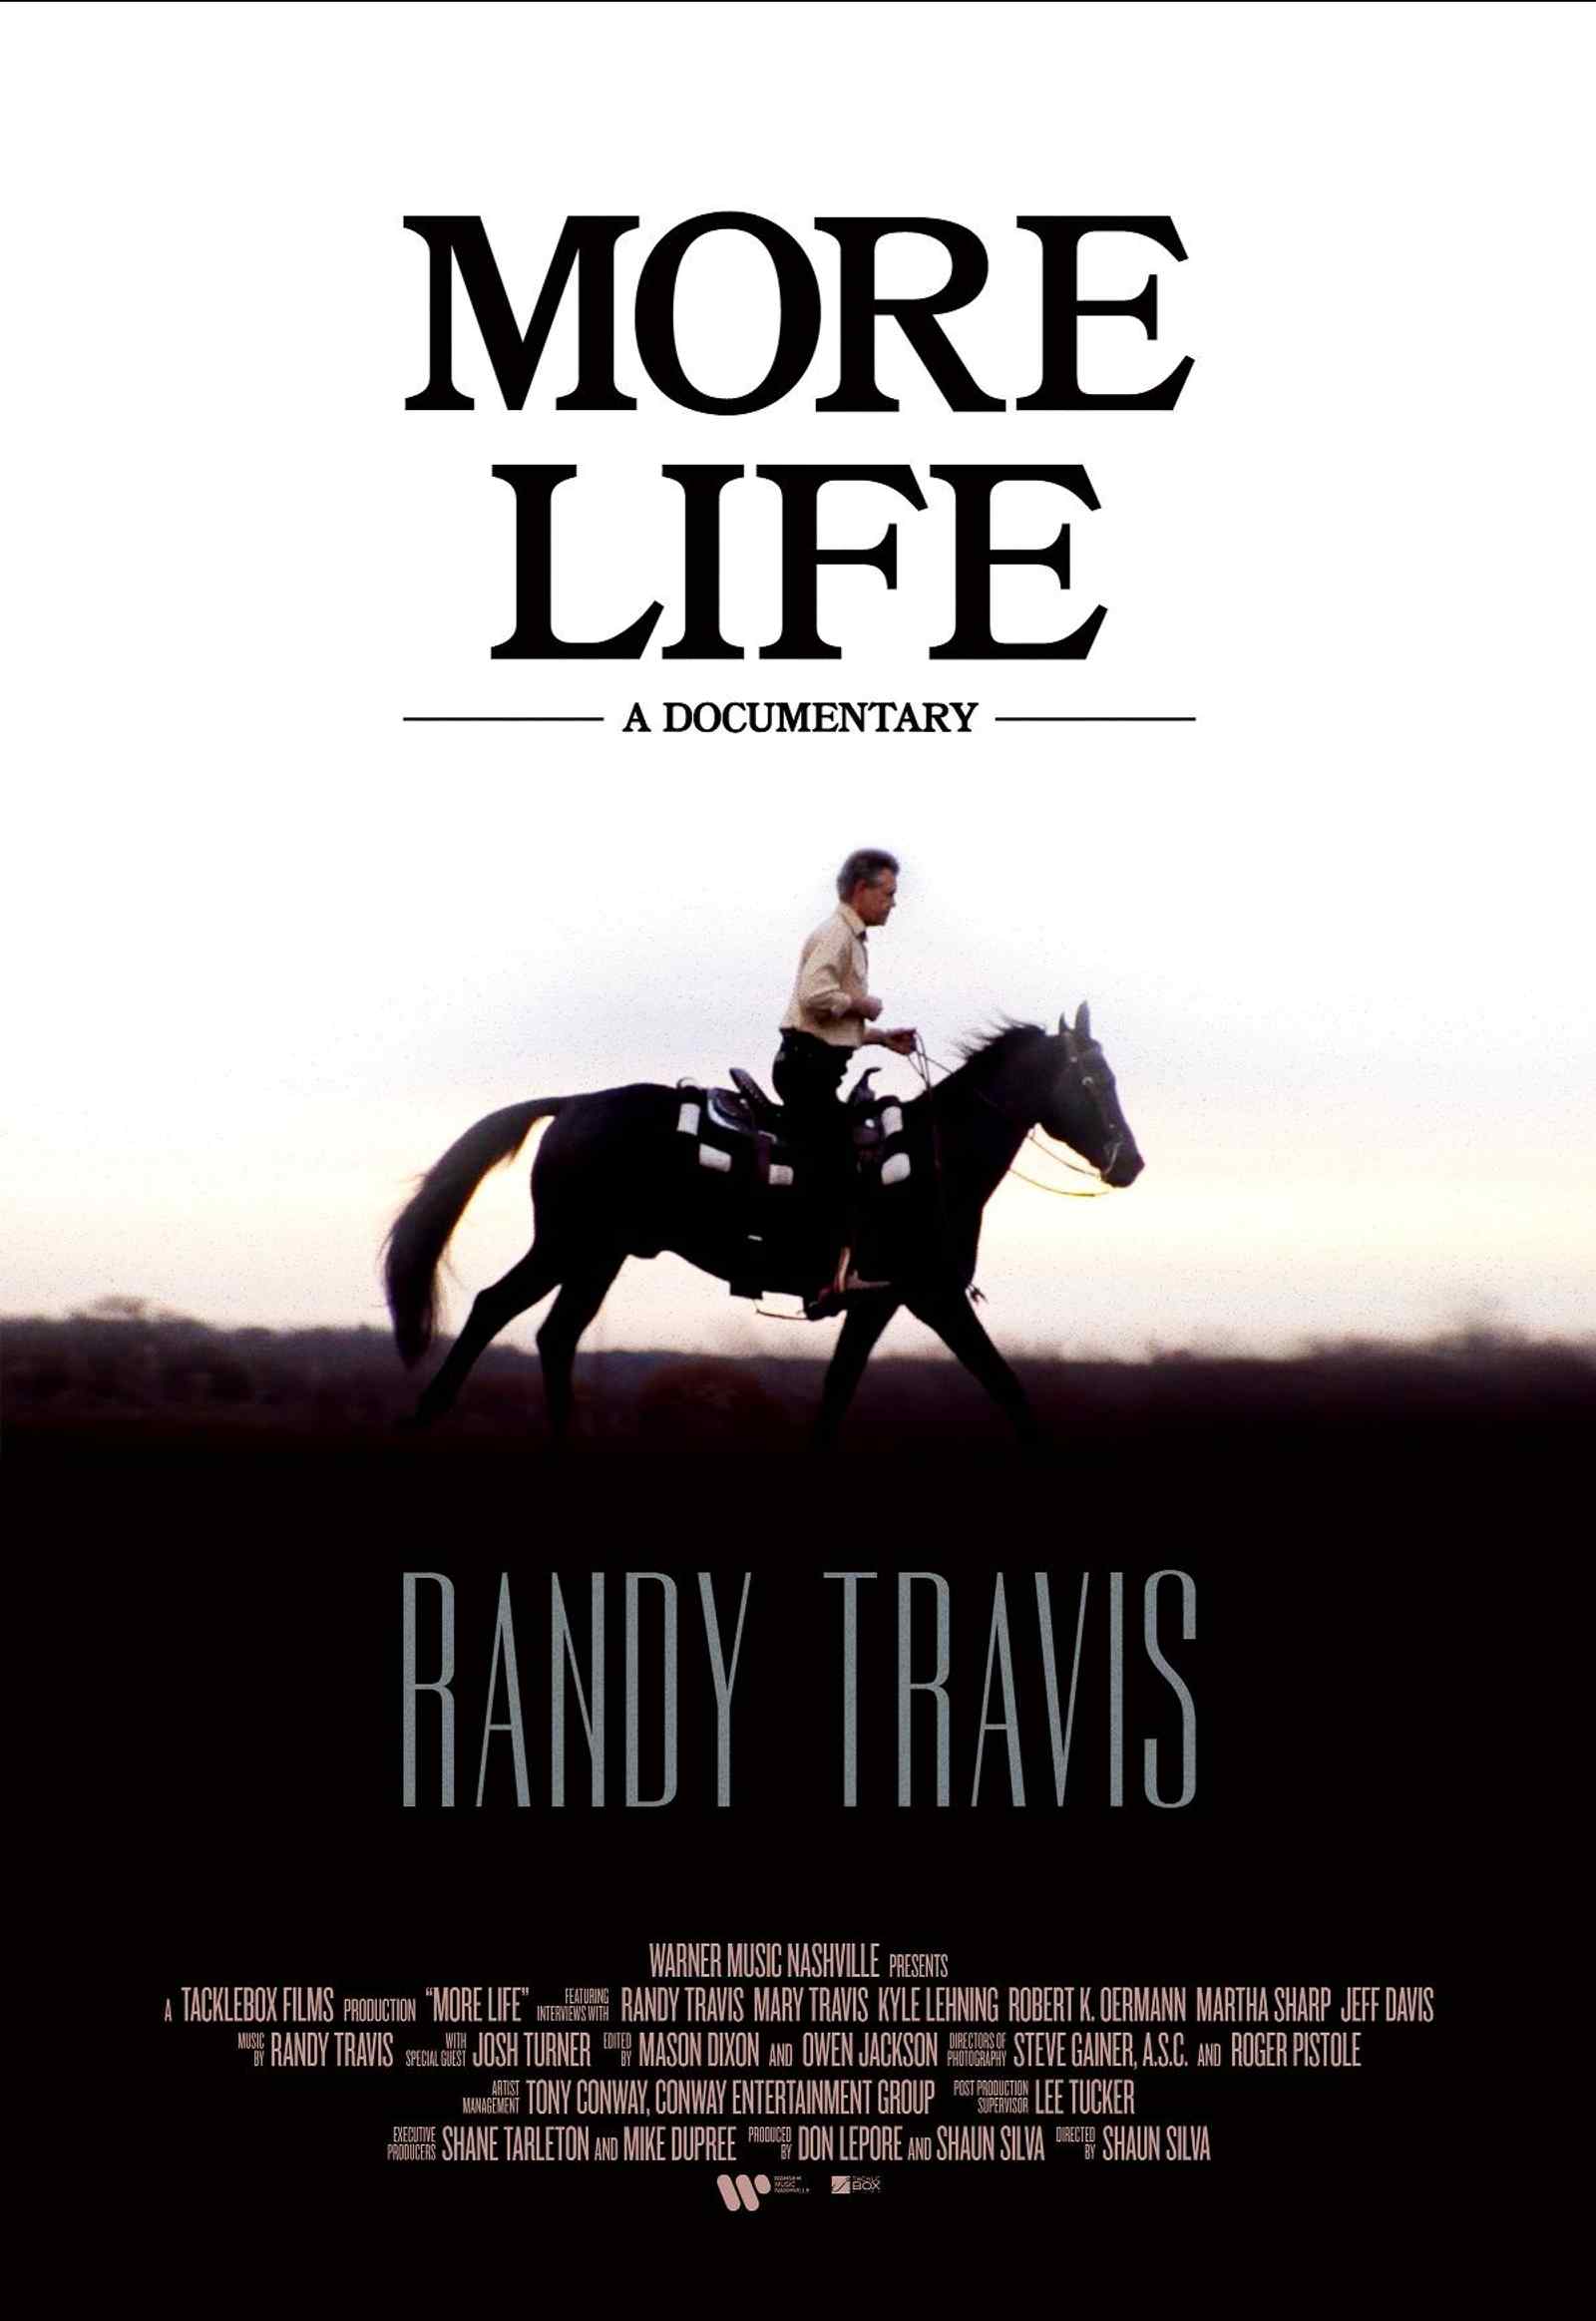 More Life by Randy Travis